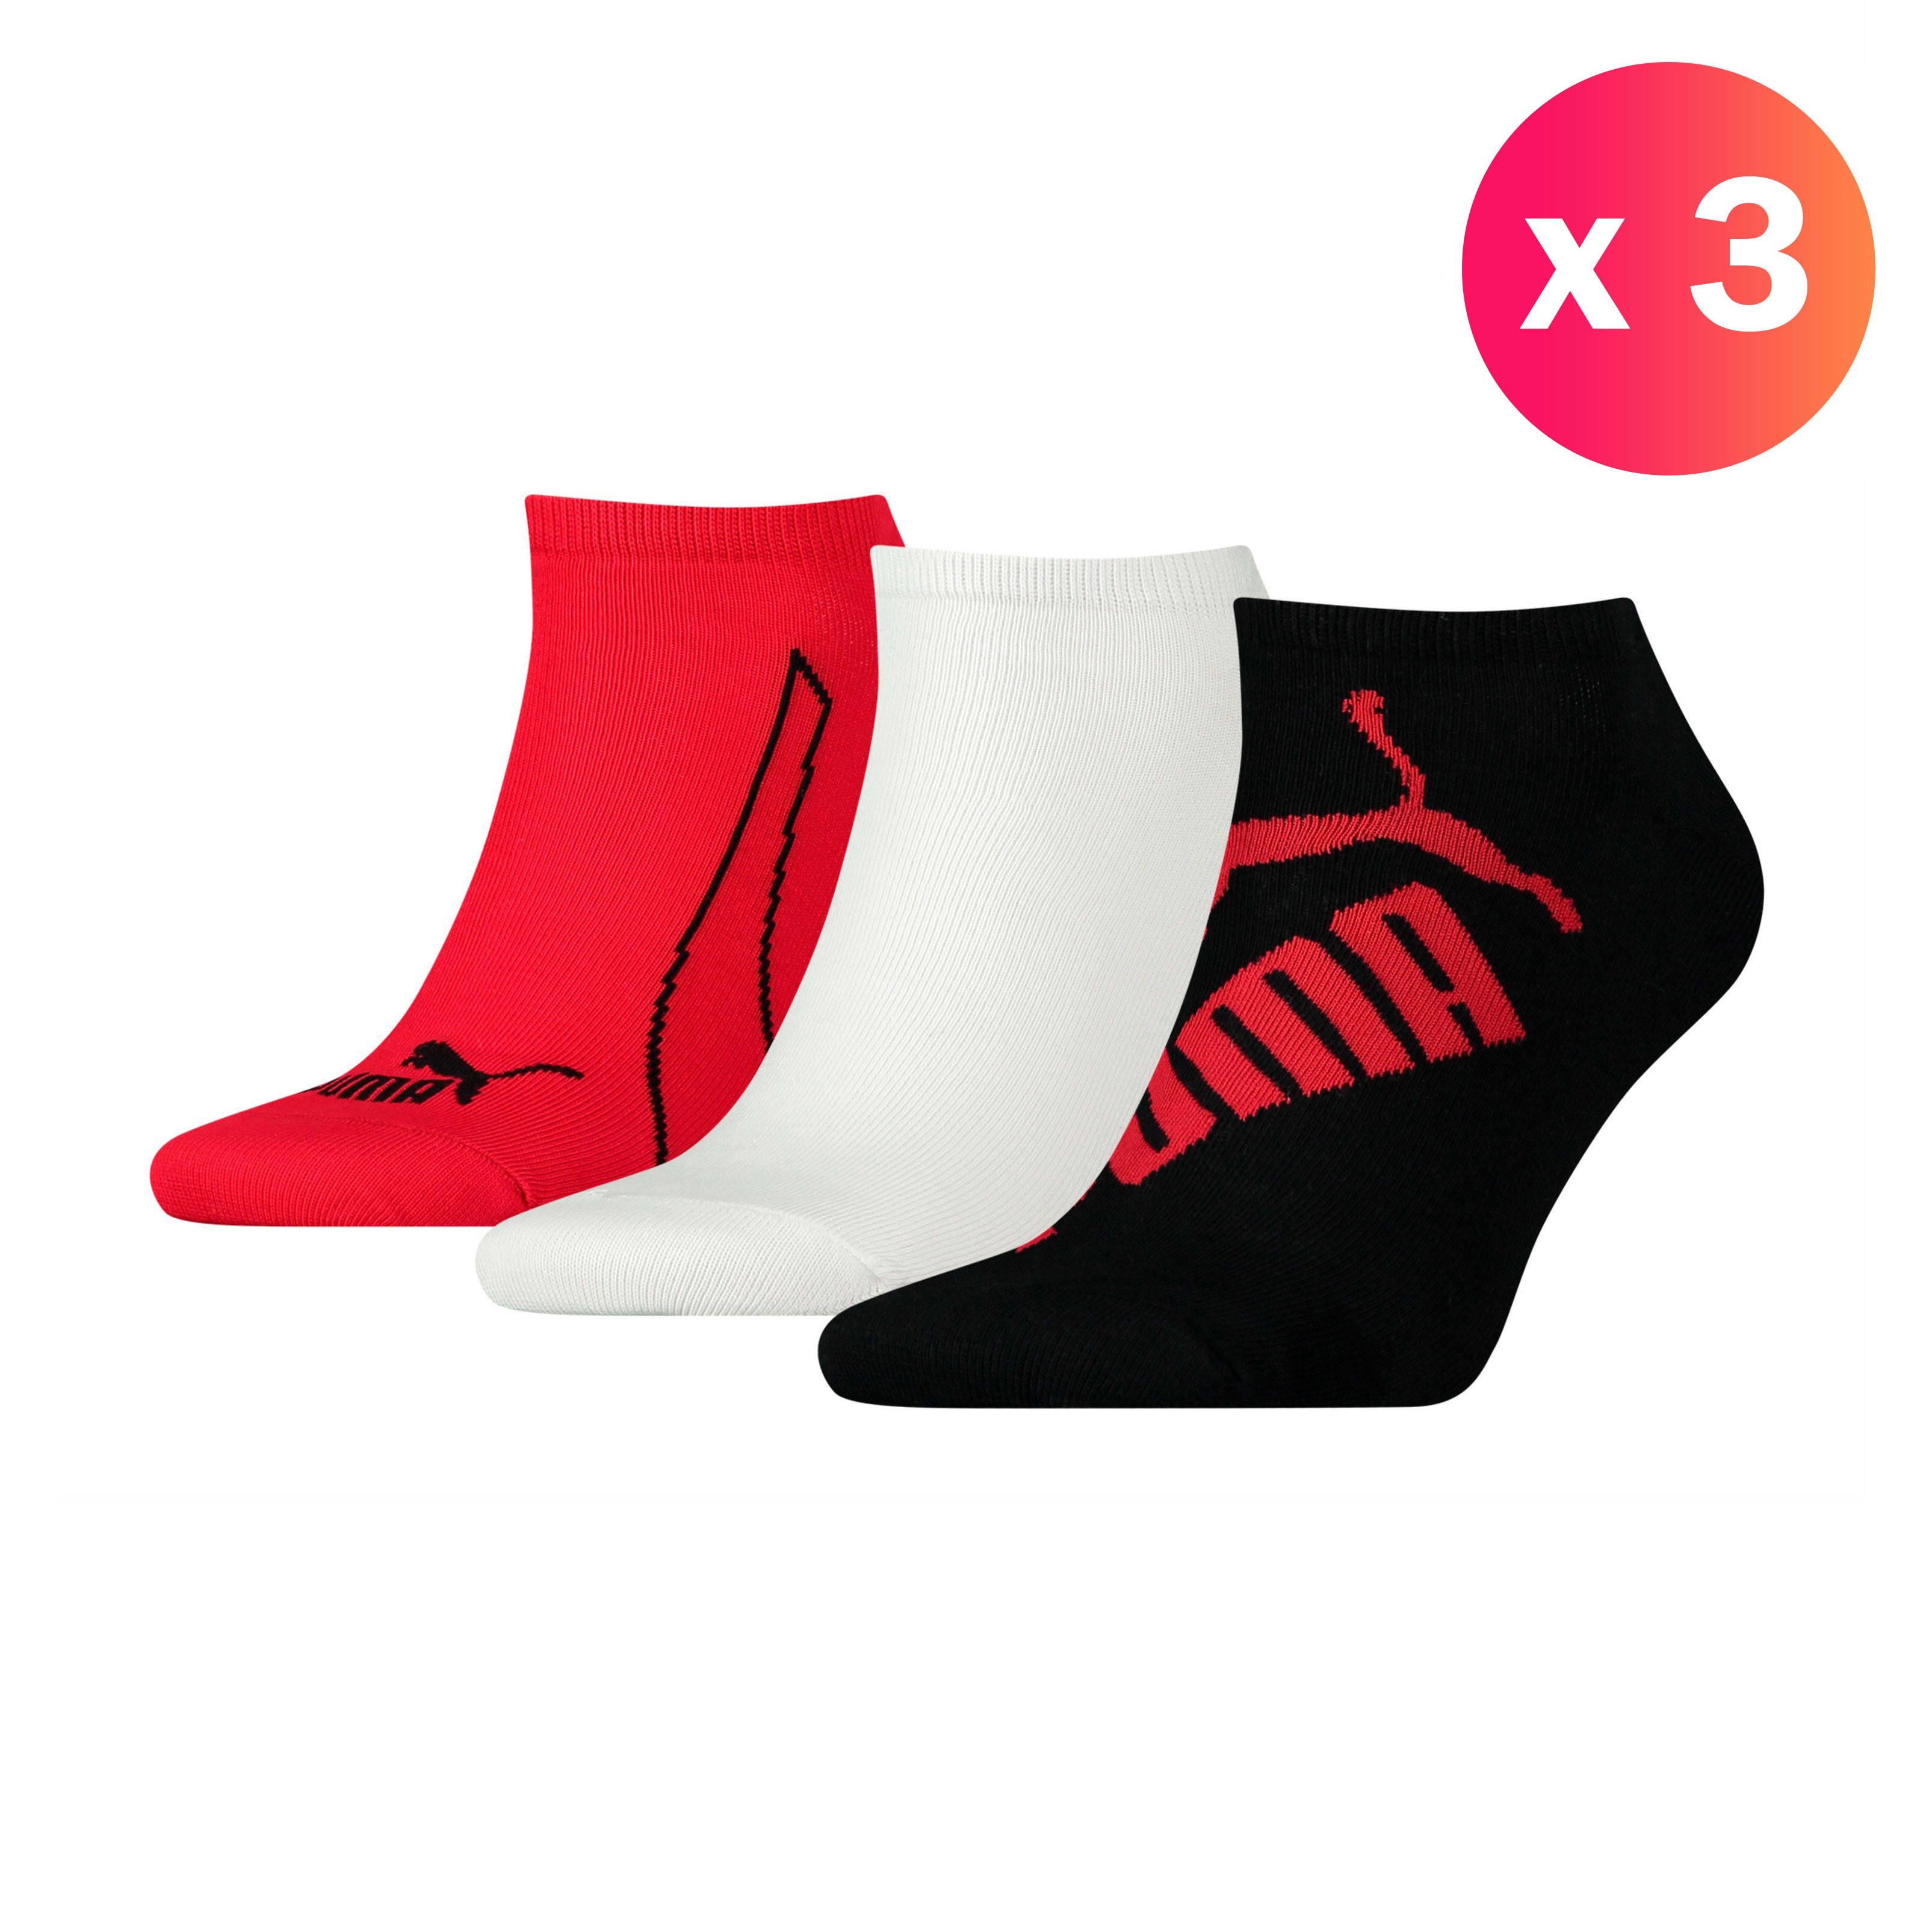 Lot of 3 pairs of PUMA Graphic - black white and red socks - Puma :...